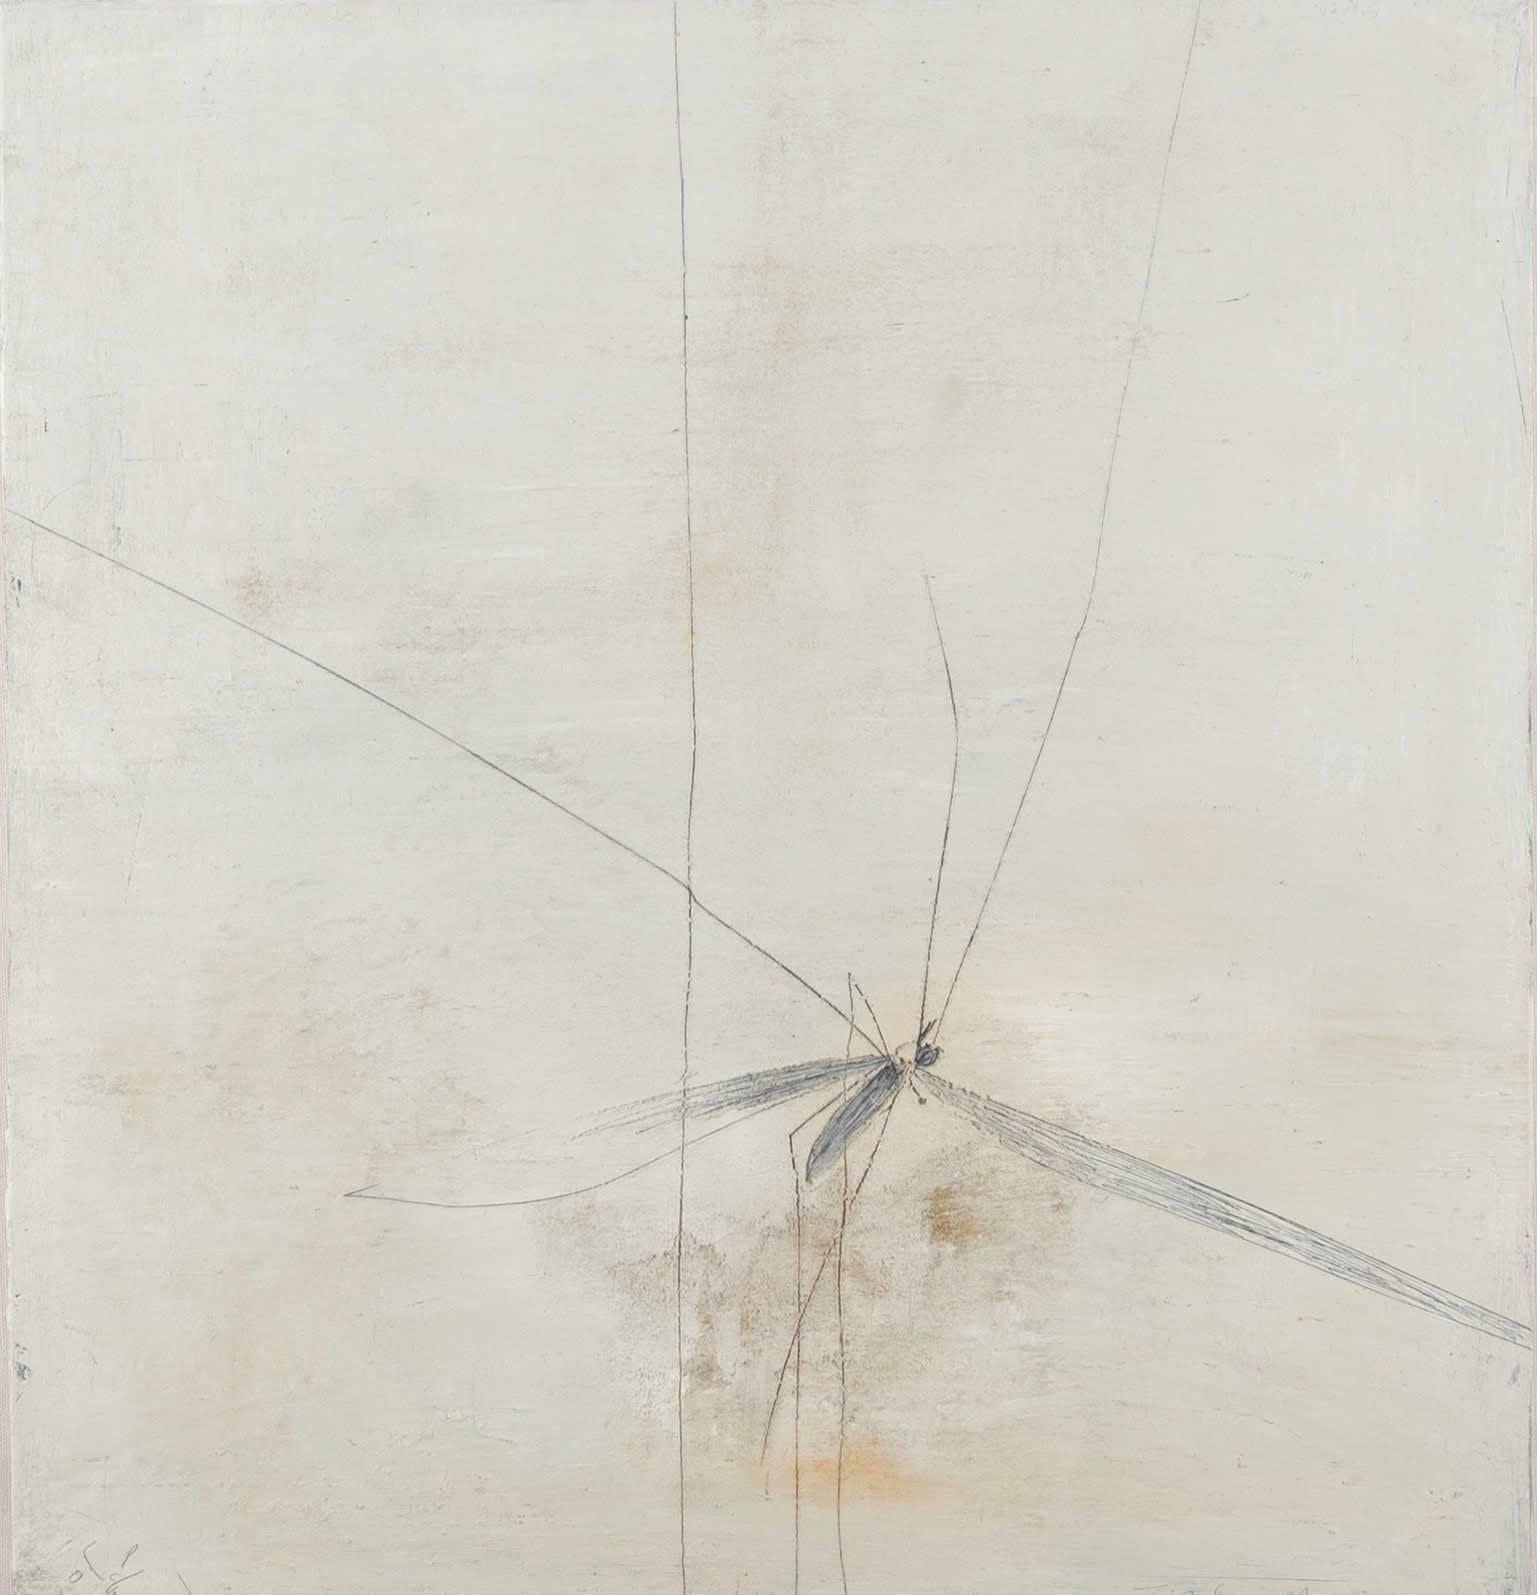 Tipula Maxima Painting by Keith Purser B. 1944, 2008

Additional information:
Medium: Oil on plywood
Dimensions: 51 x 48 cm
20 1/8 x 18 7/8 in
Signed, dated and titled.

Keith Purser lives and works on the edge of the desert-like environment of